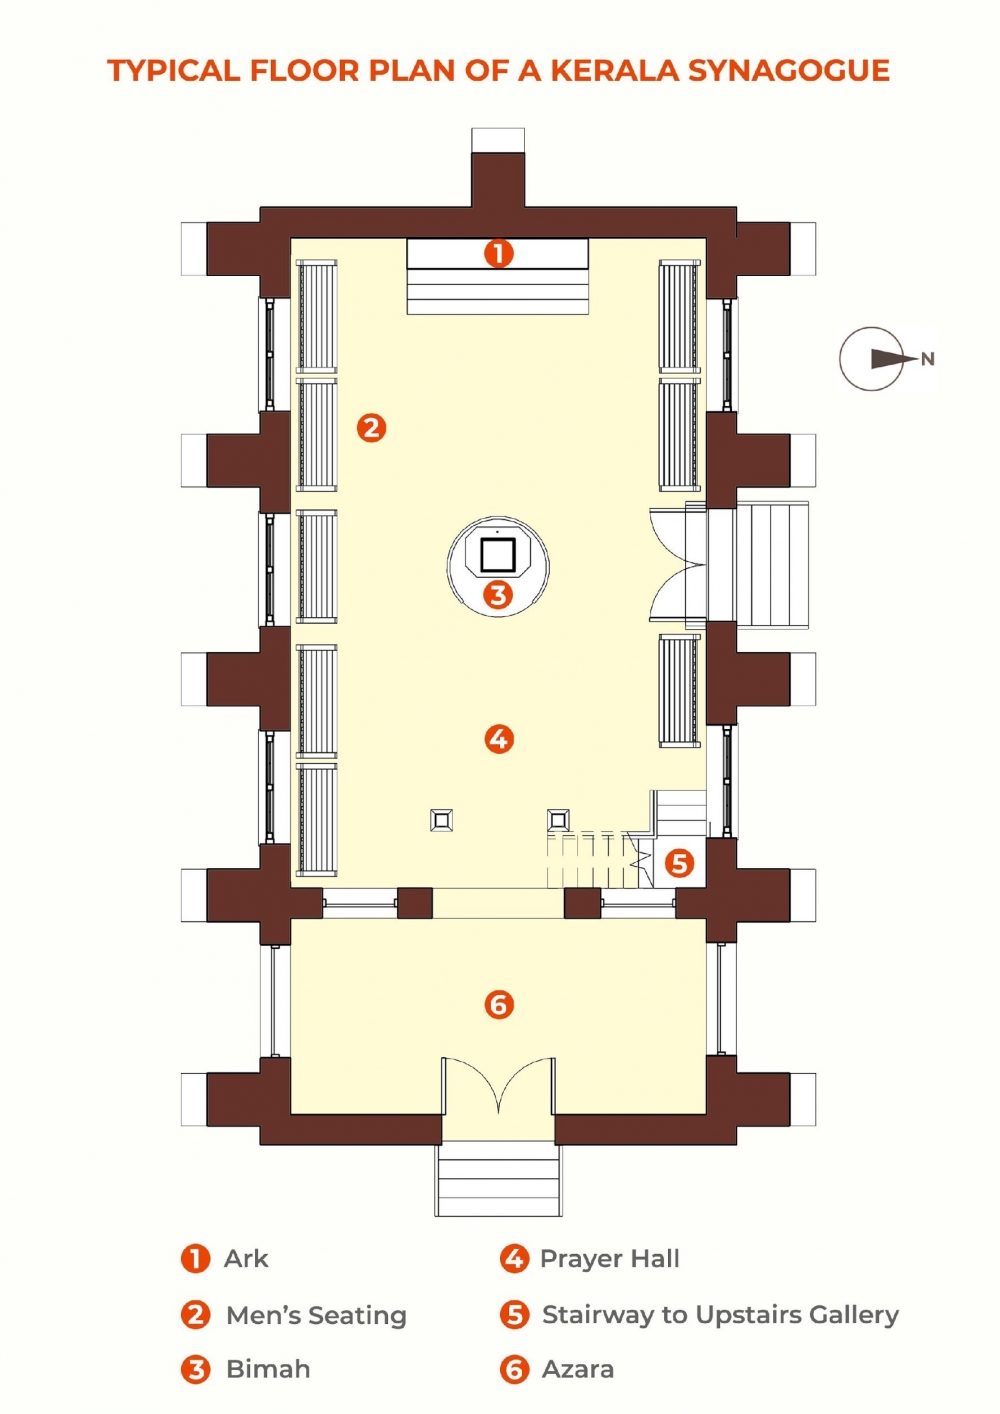 Typical floor plan of a Kerala synagogue showing its various components